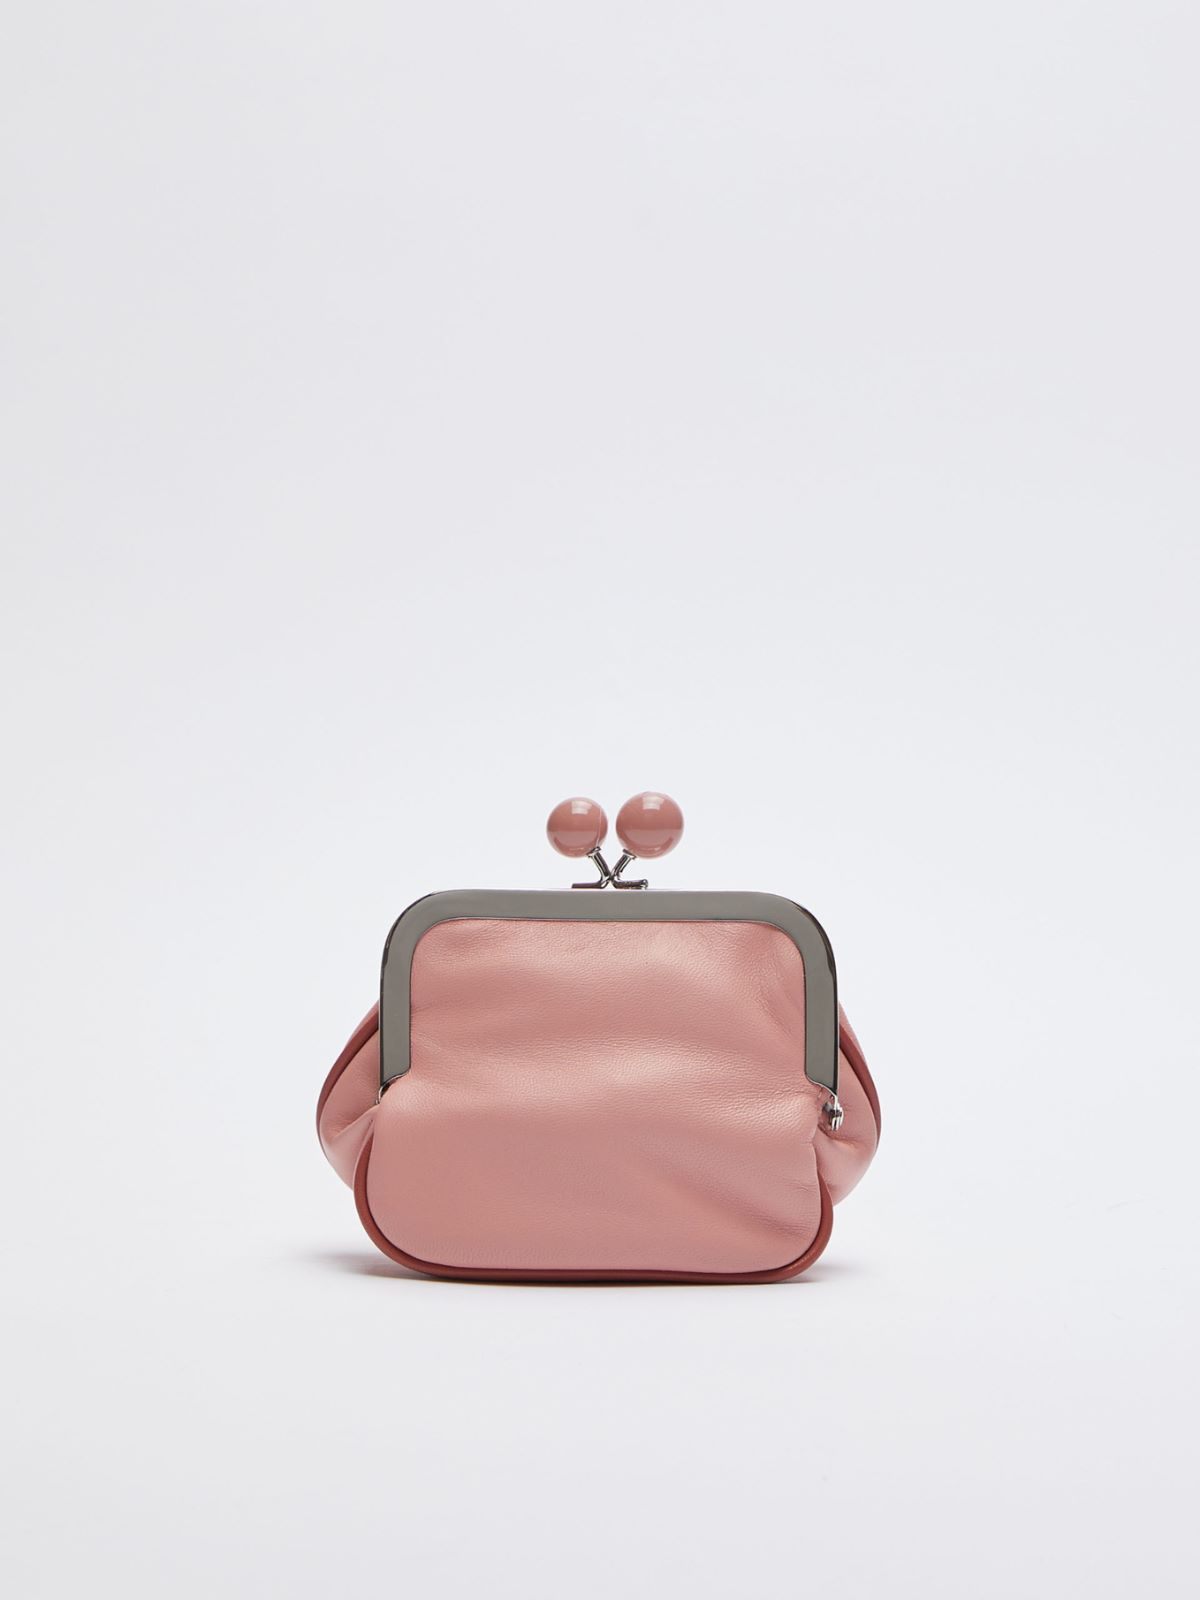 Extra Small Pasticcino Bag in nappa leather - ANTIQUE ROSE - Weekend Max Mara - 3